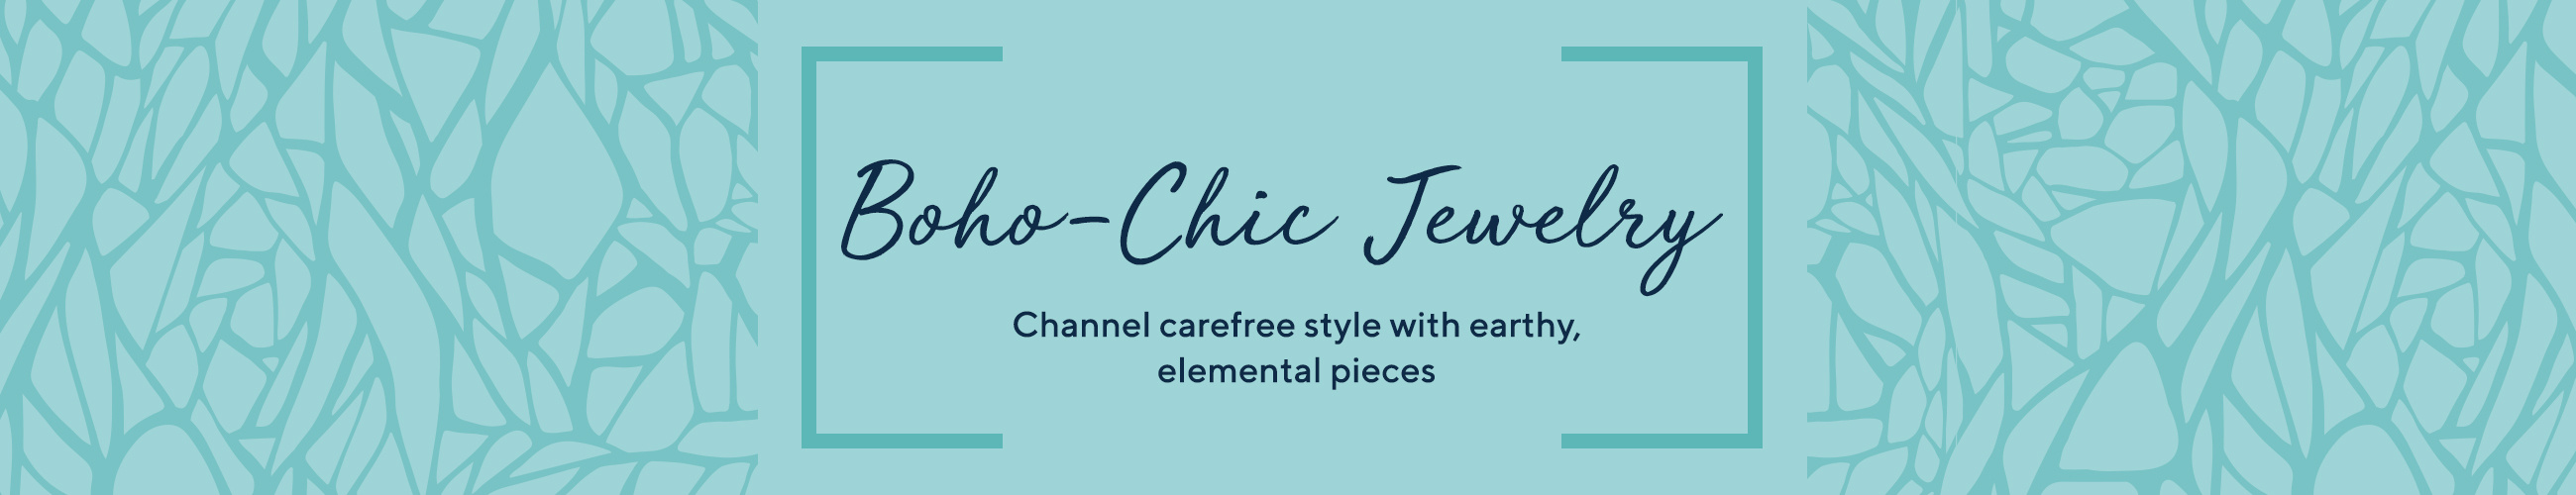 Boho-Chic Jewelry  Channel carefree style with earthy, elemental pieces 